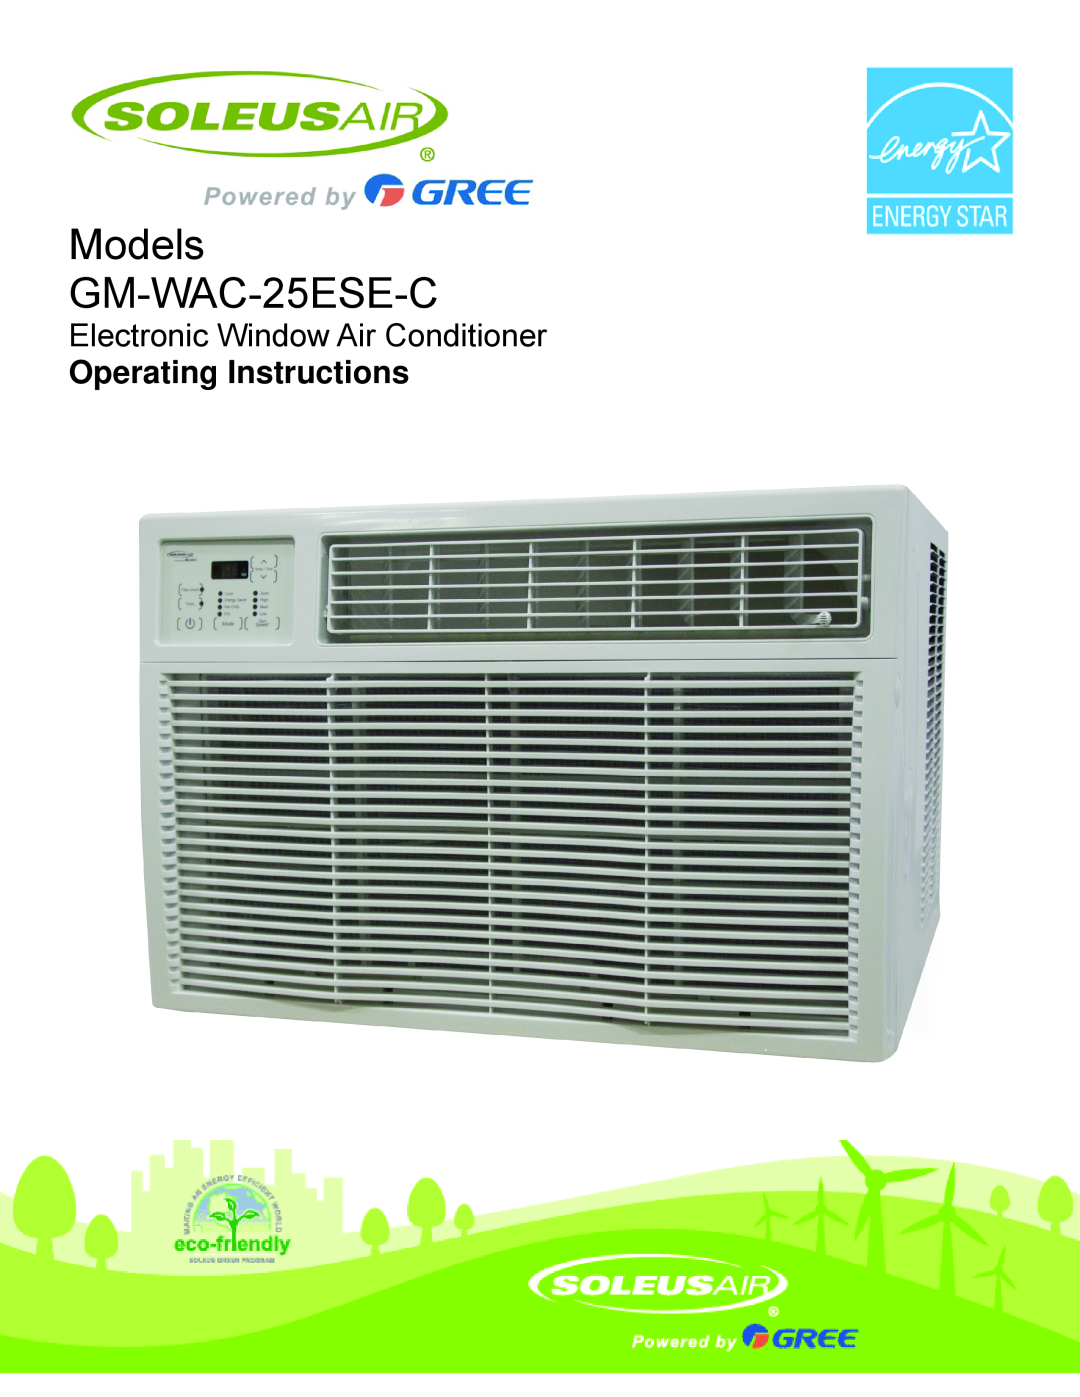 Soleus Air manual Models GM-WAC-25ESE-C, Electronic Window Air Conditioner, Operating Instructions 